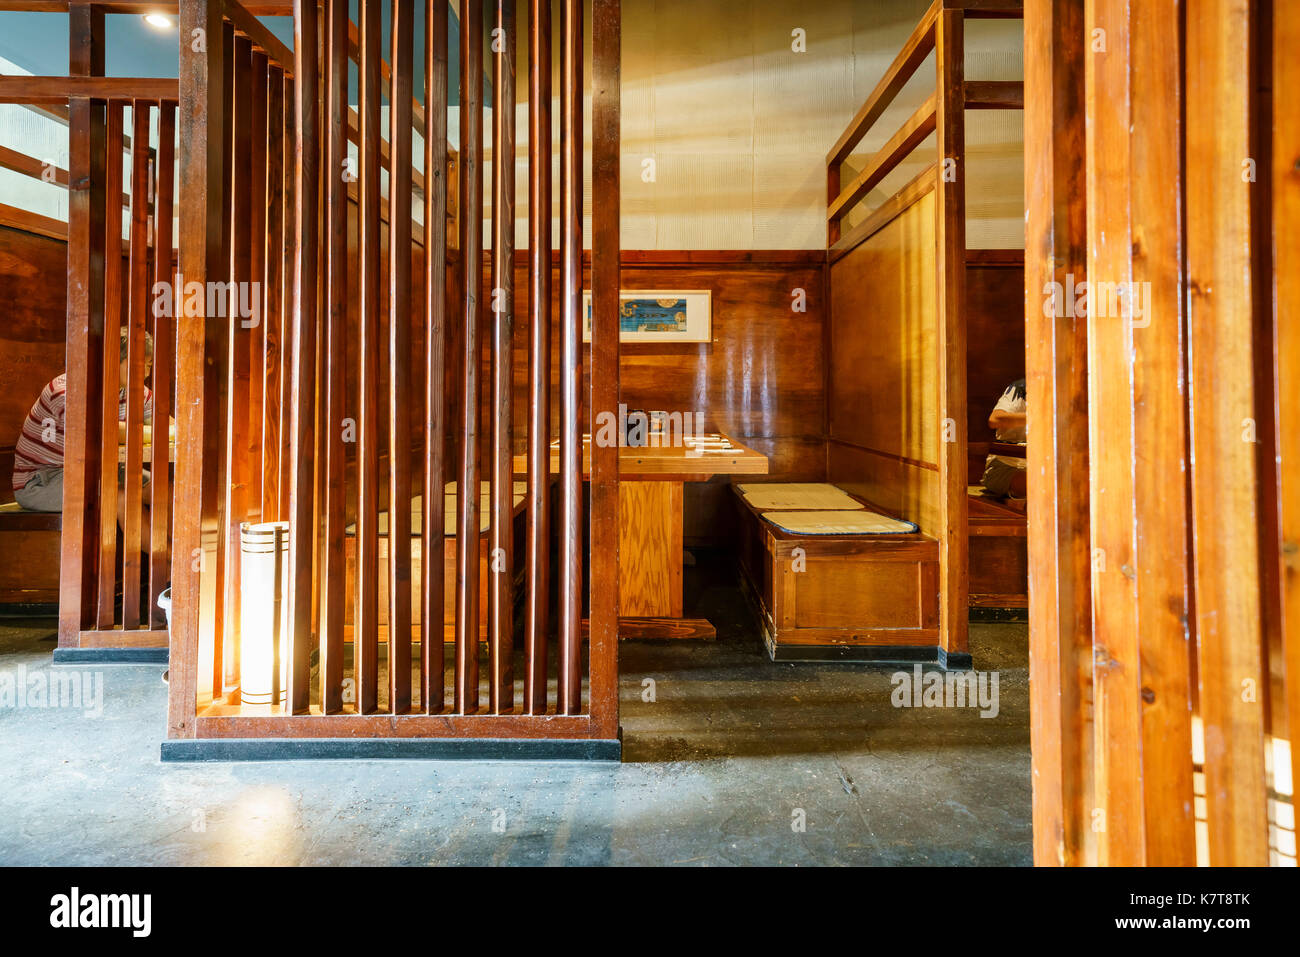 Los Angeles, SEP 9: Wooden Japanese style interior view of a restaurant on SEP 9, 2017 at Los Angeles, California, U.S.A. Stock Photo